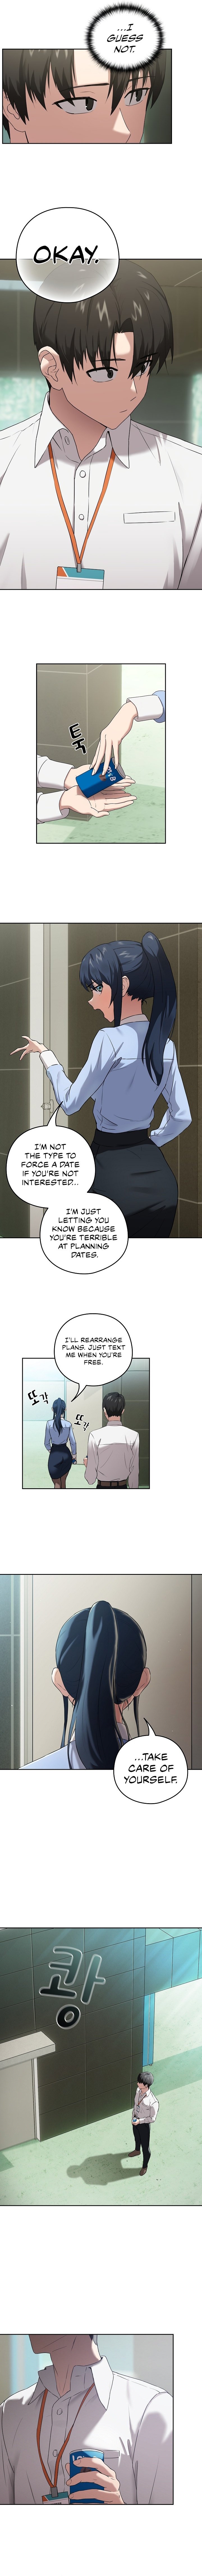 after-work-love-affairs-chap-3-7